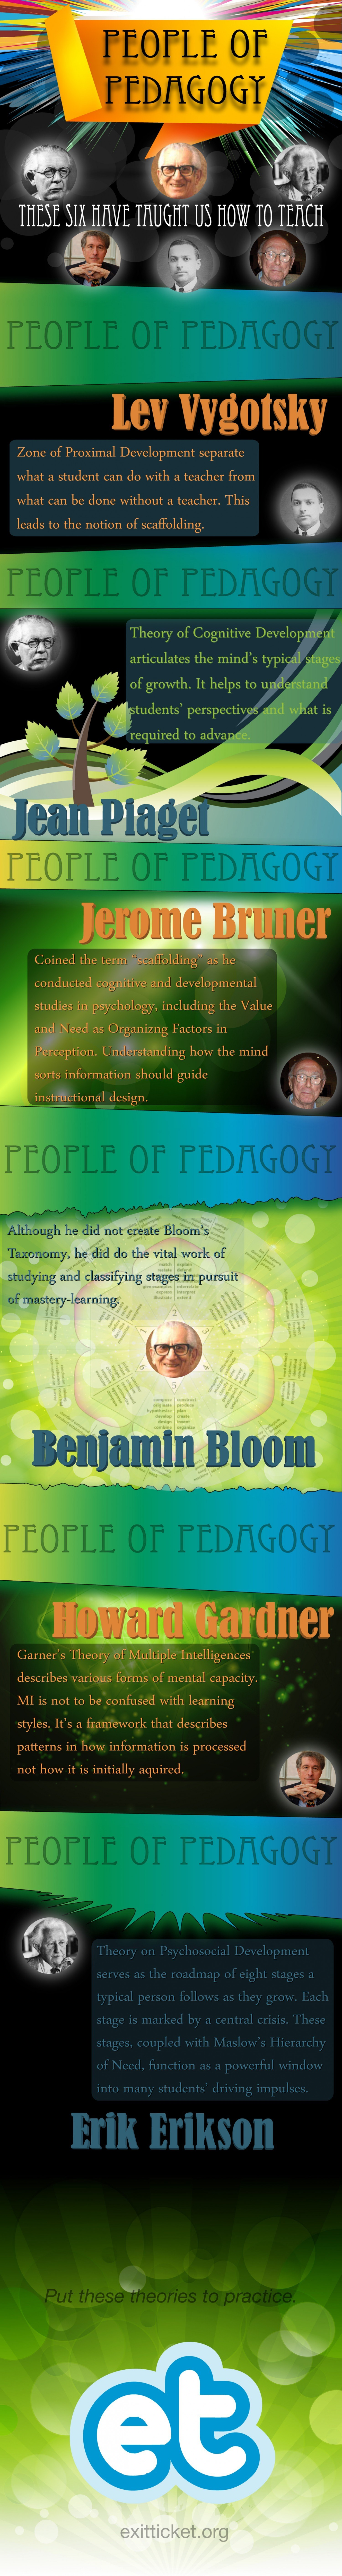 The People of Pedagogy Infographic